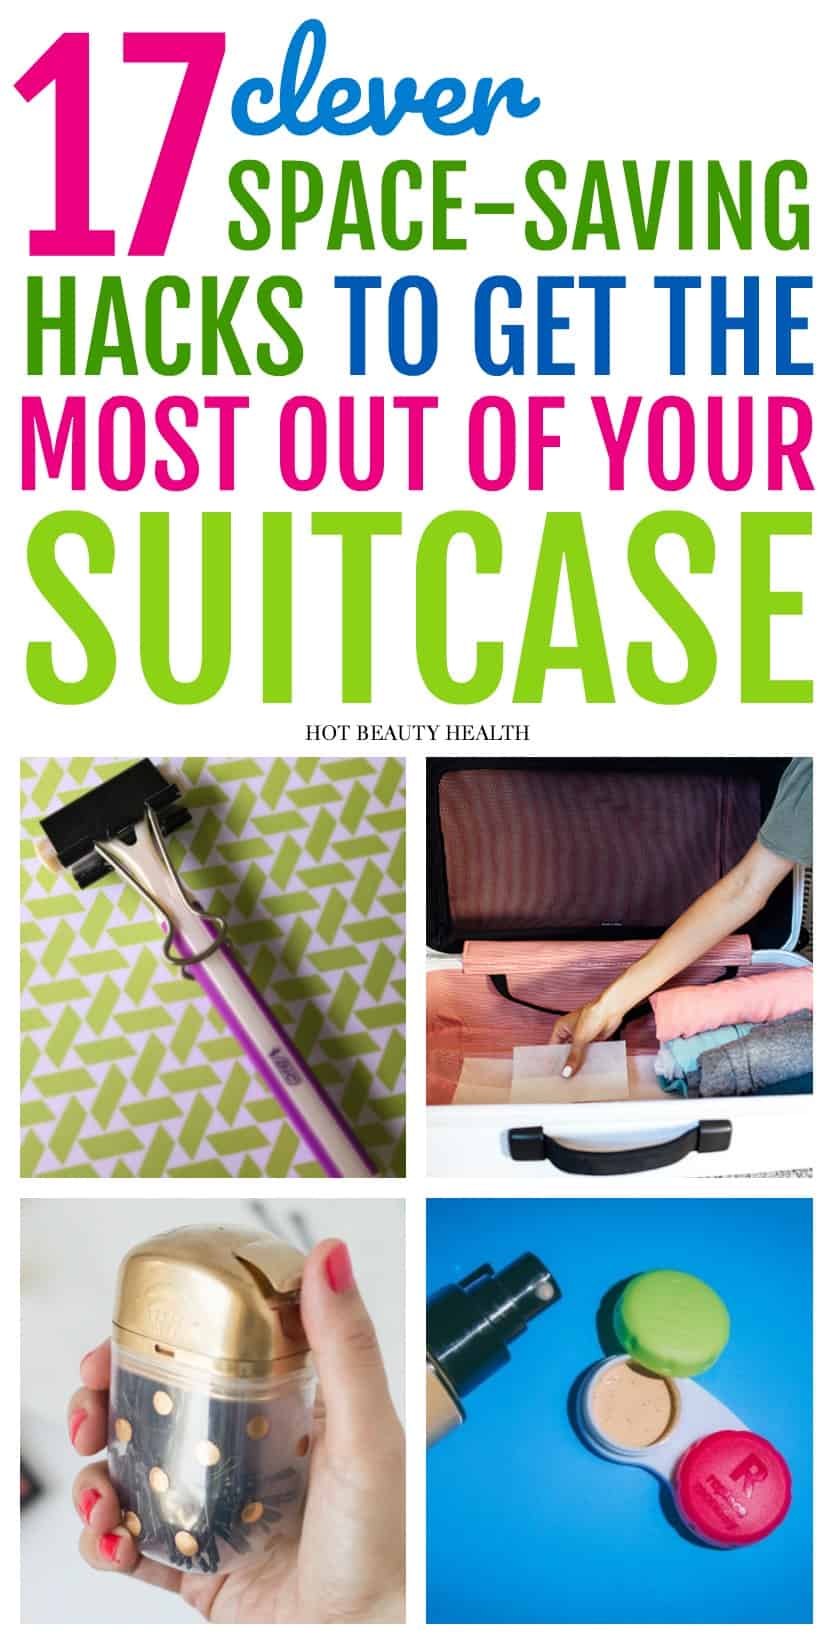 space saving tips for suitcase